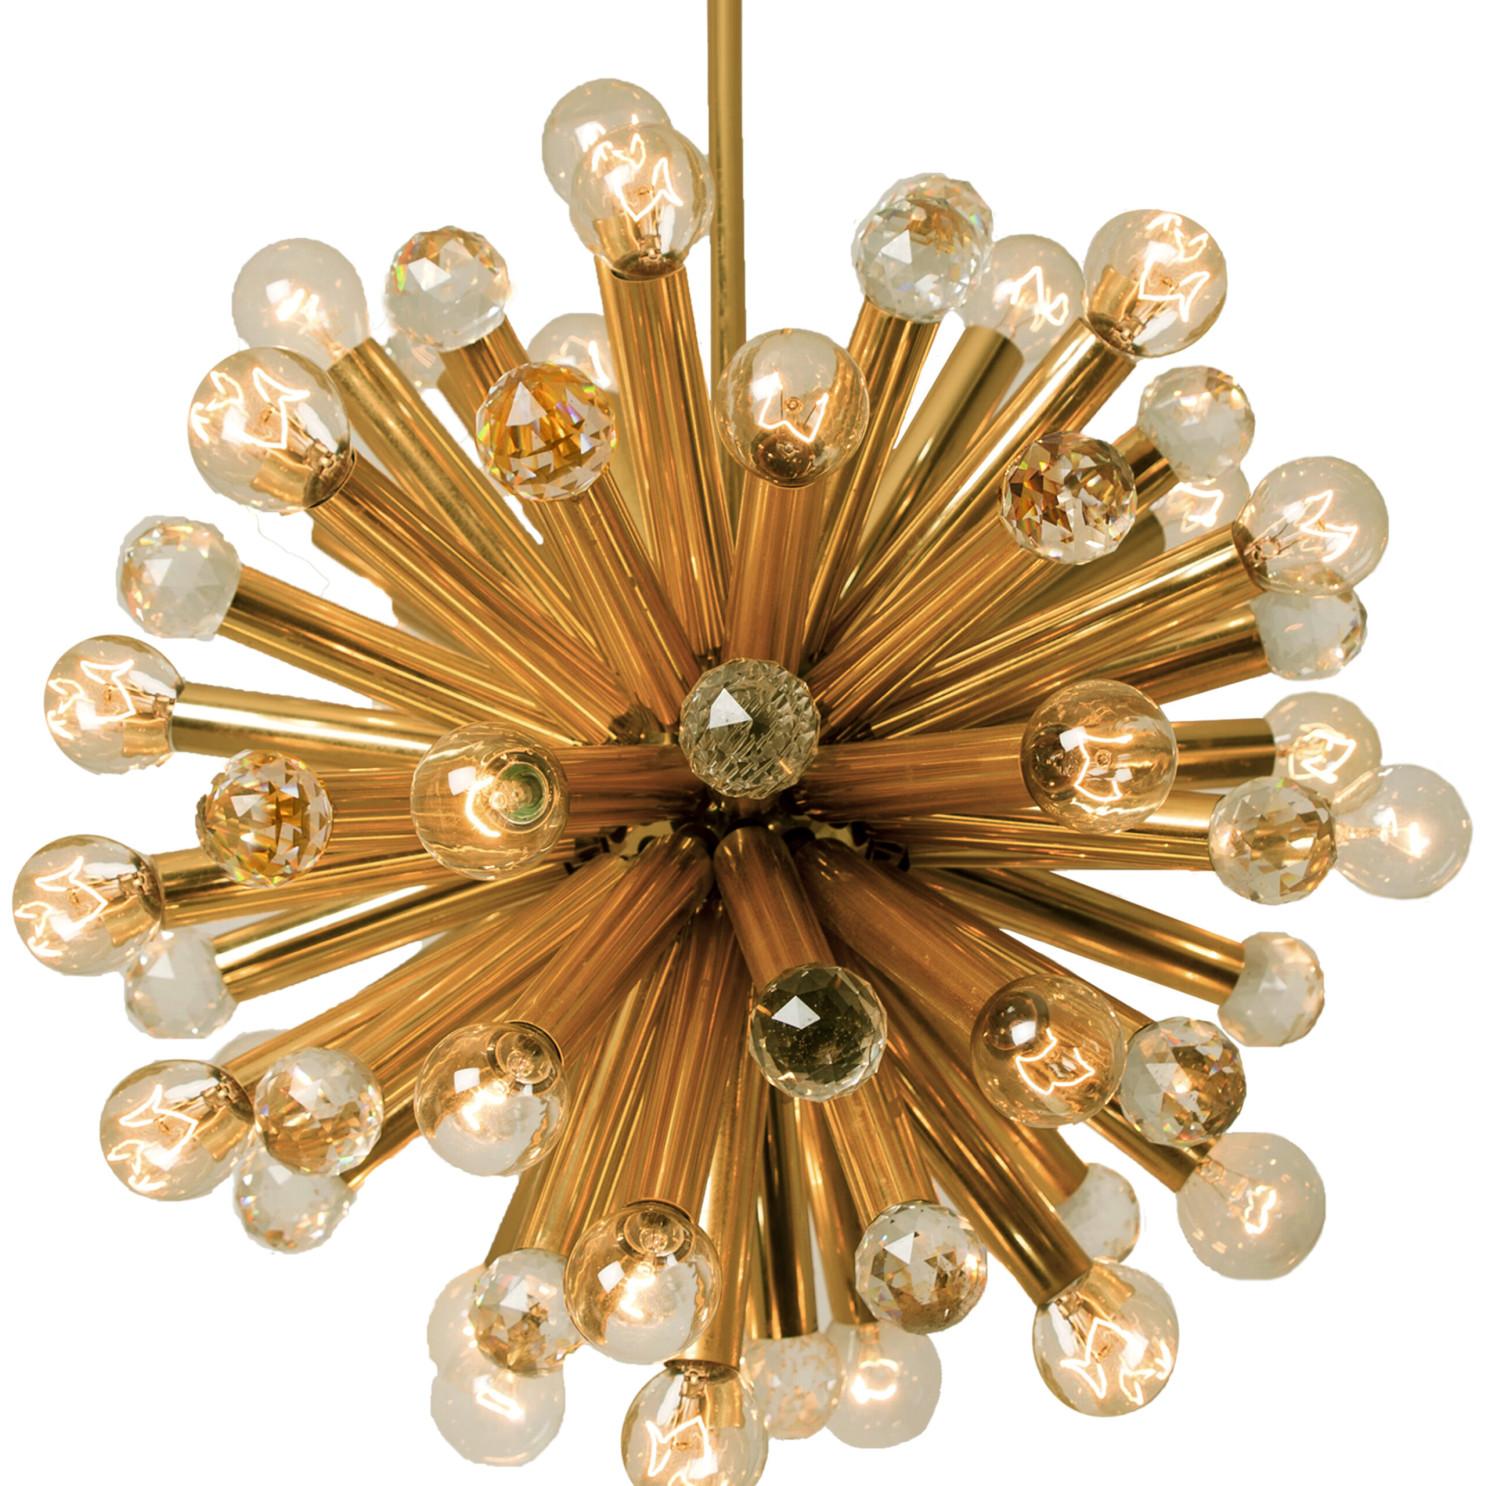 This high quality chandelier was manufactured by Ernst Palme in German Westheim during the 1960s. This lamp has gilt brass arms with large Swarovski balls and 33-light bulbs. The handcut lead crystal Swarovski balls reflect multiple colors in the